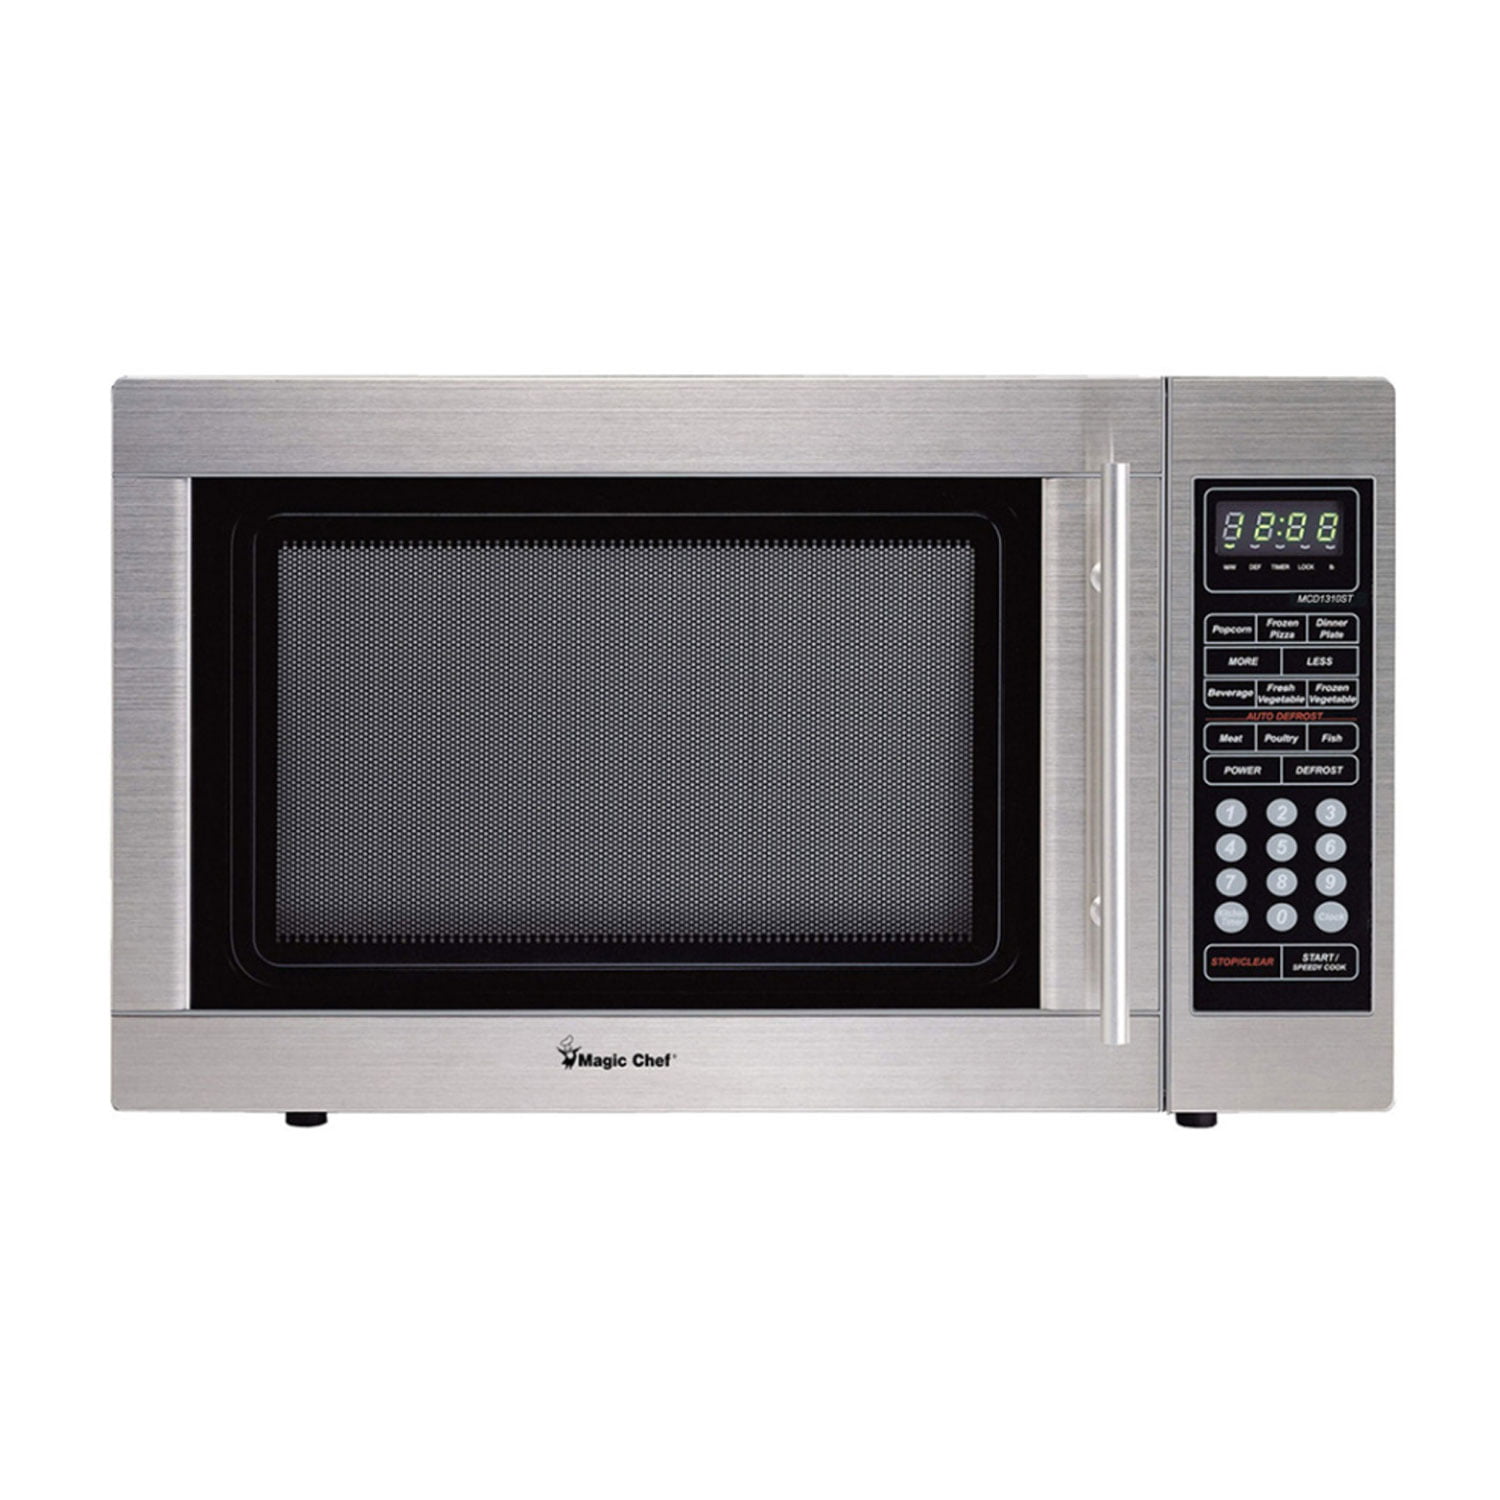 Magic Chef Microwave Stainless Steel